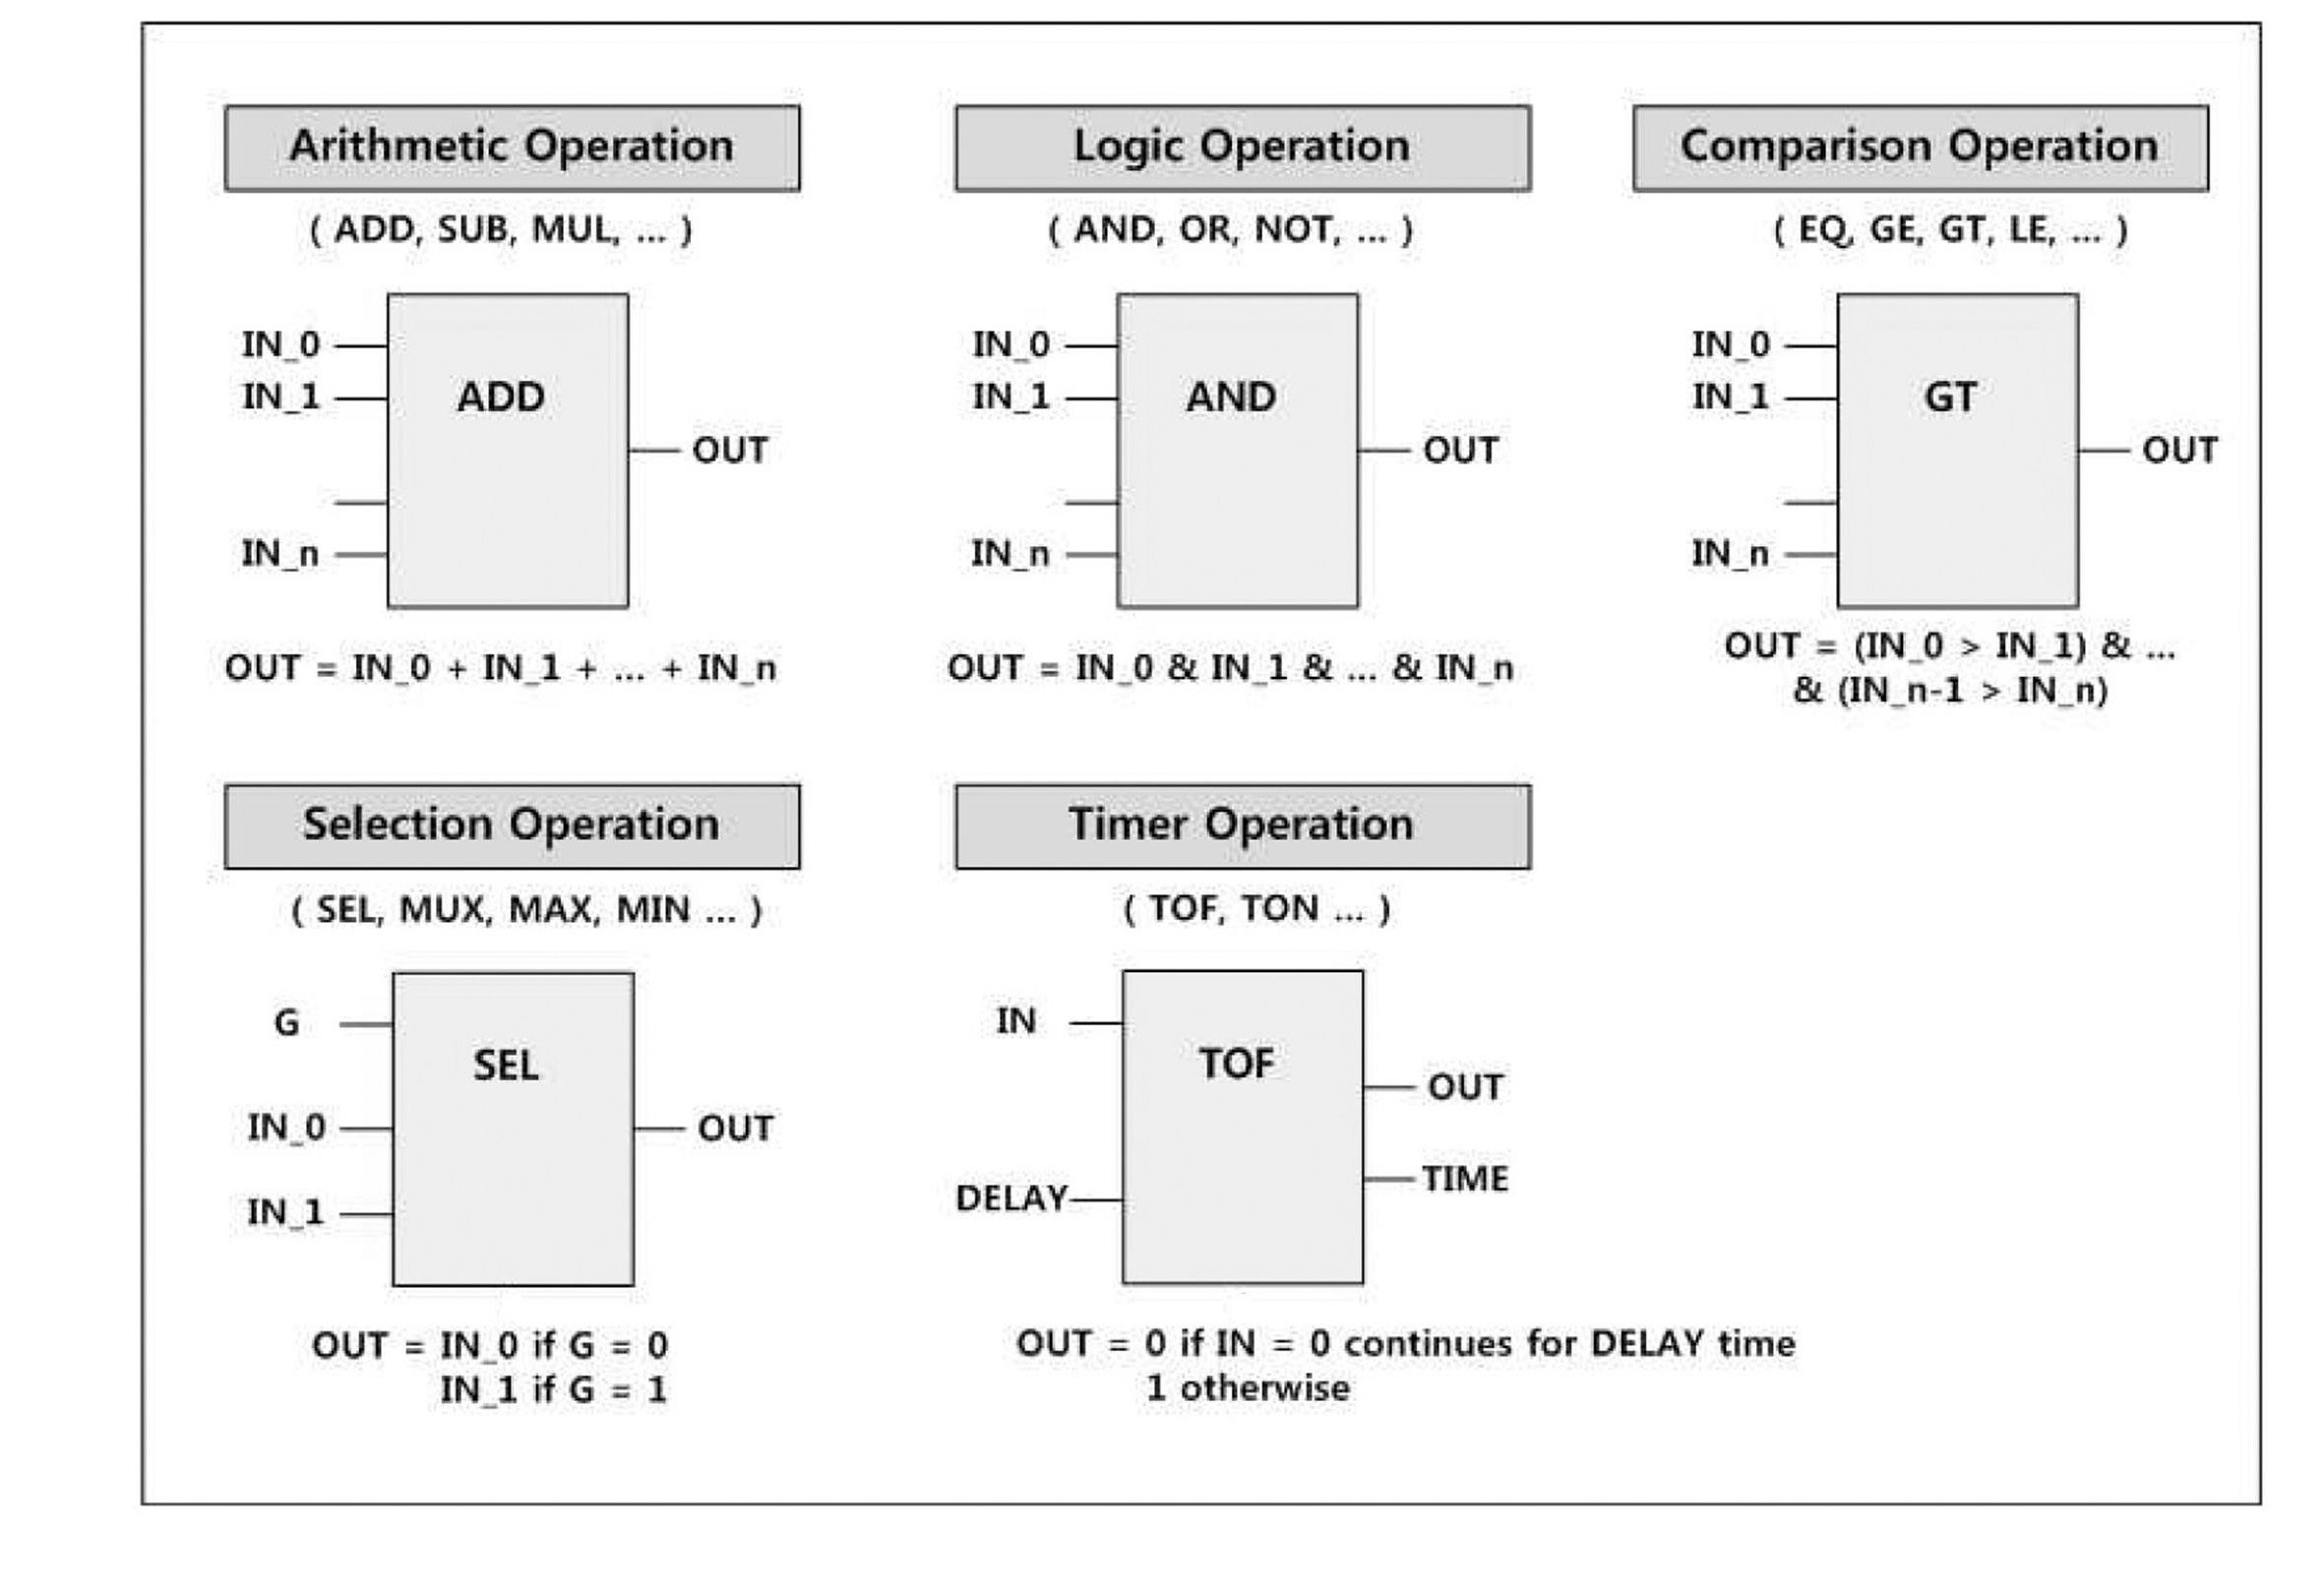 Function Blocks and Categories Defined in IEC 61131-3